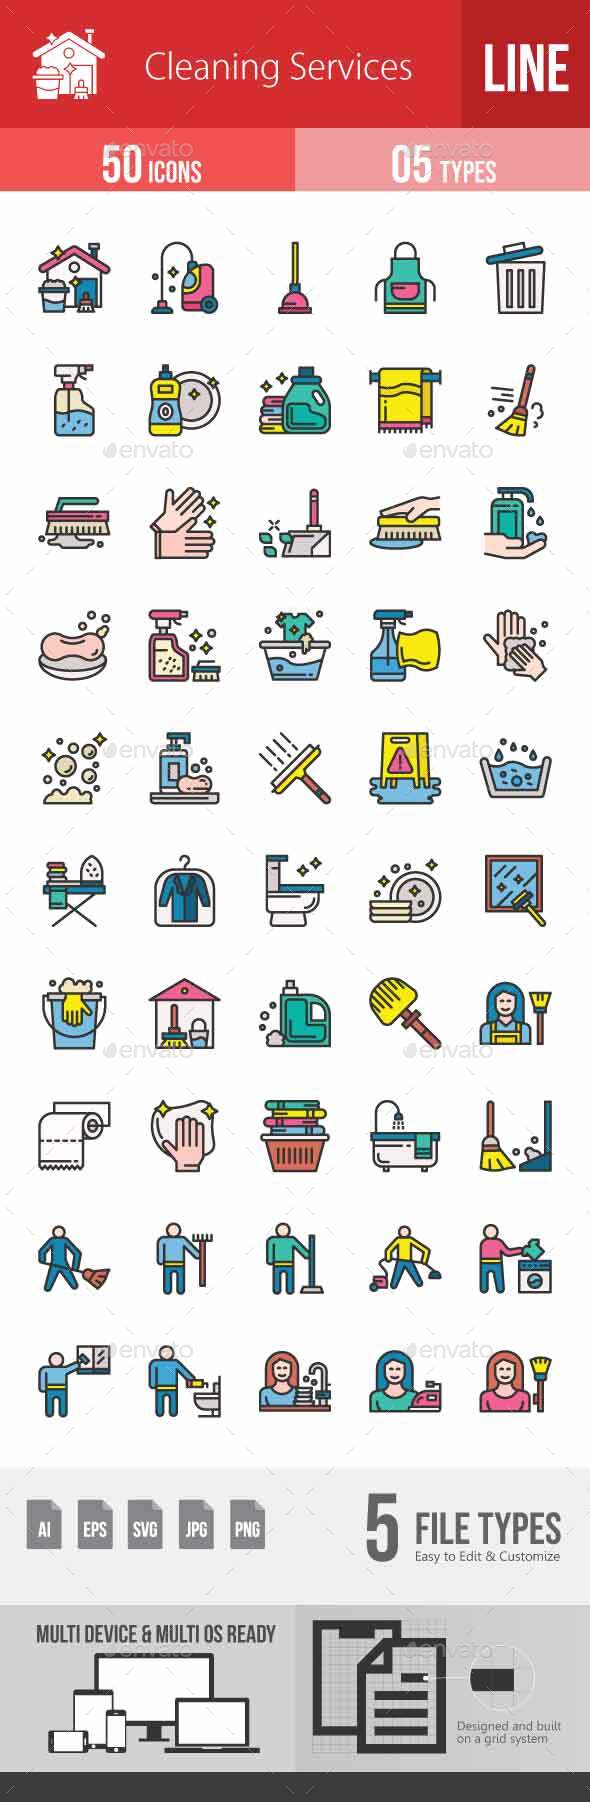 [DOWNLOAD]Cleaning Services Filled Line Icons